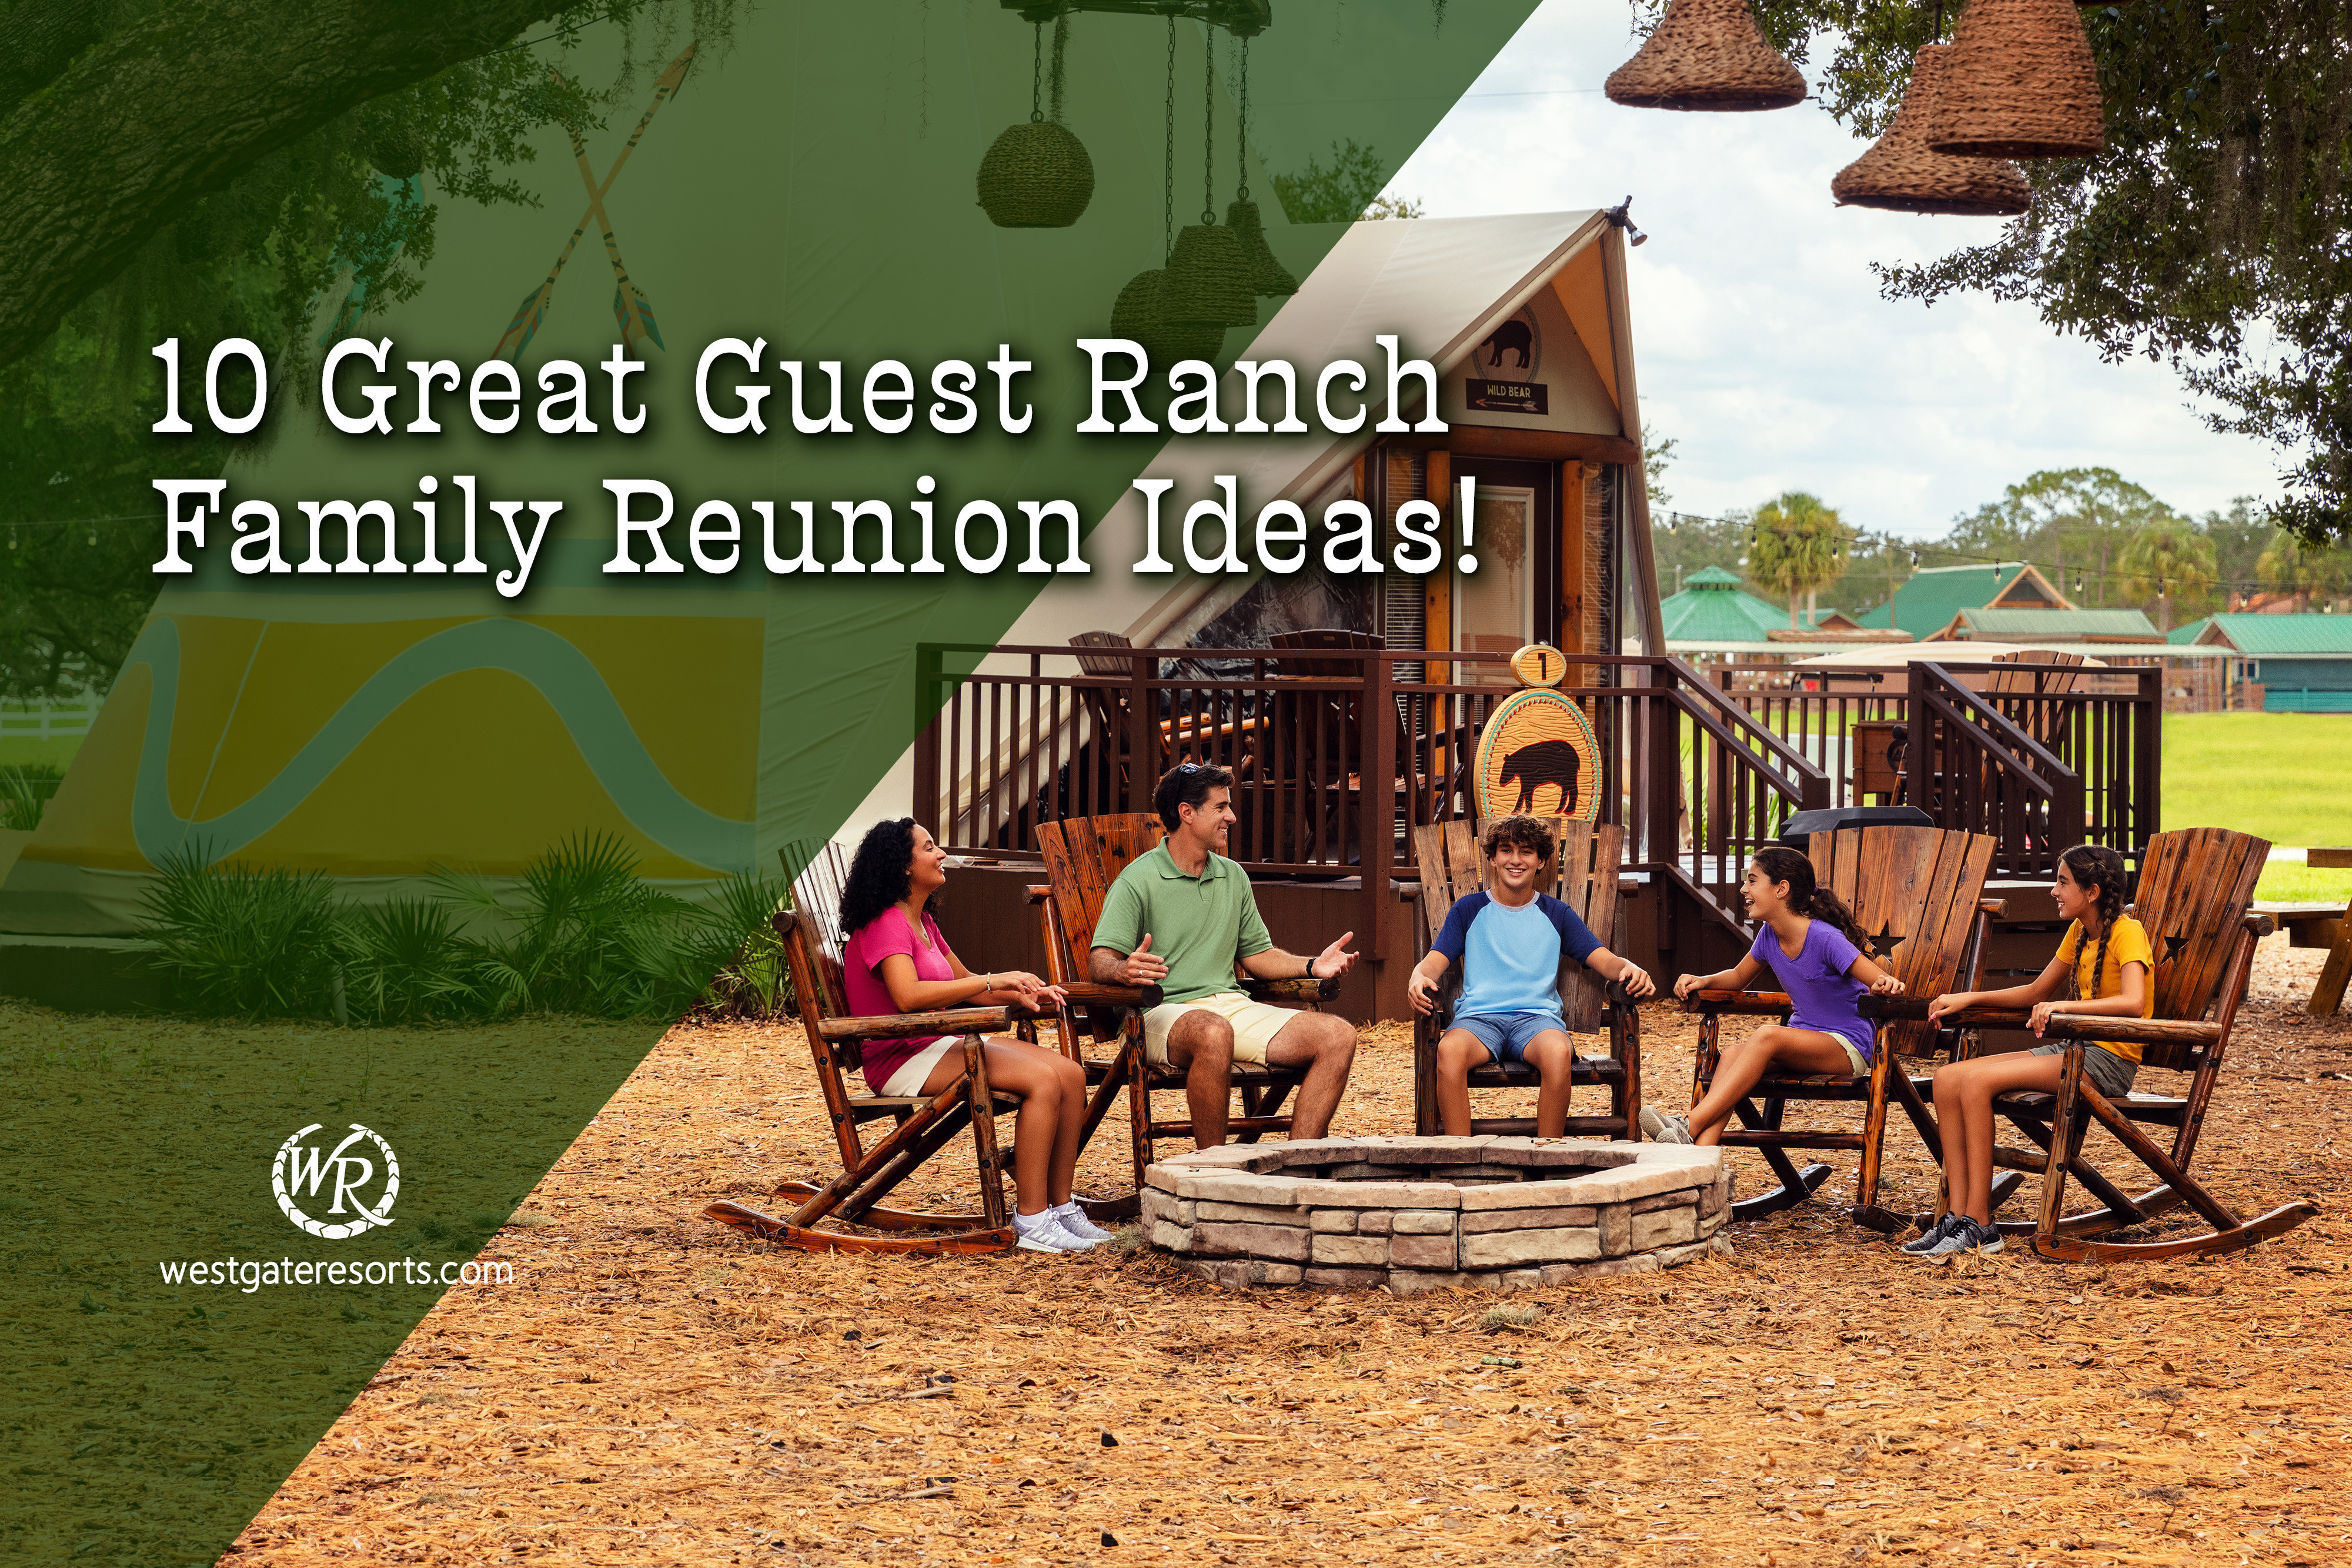 10 Great Guest Ranch Family Reunion Ideas!